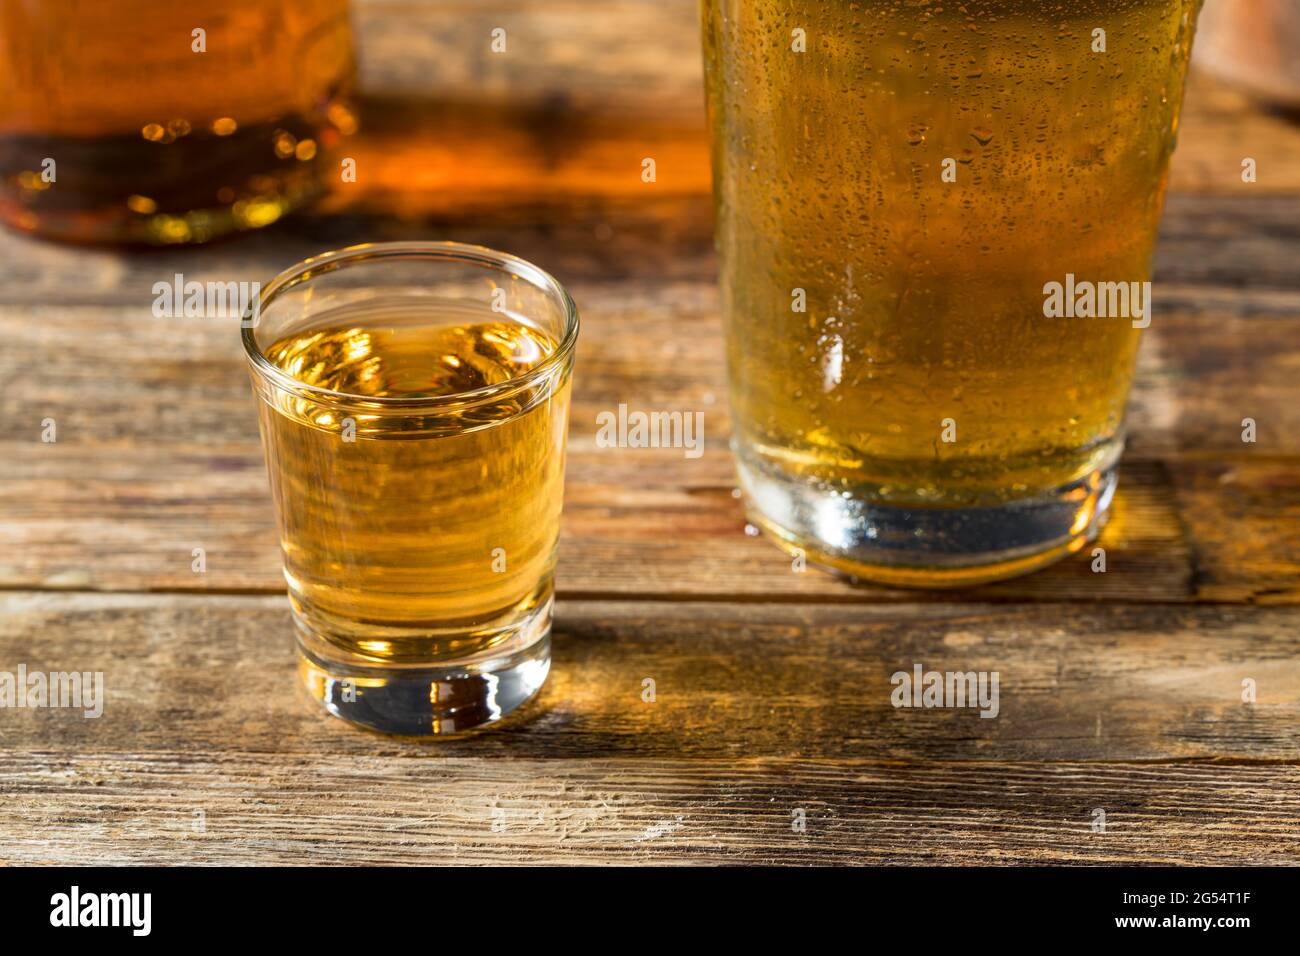 Refreshing Boozy Chicago Handshake Beer and a Shot Ready to Drink Stock Photo